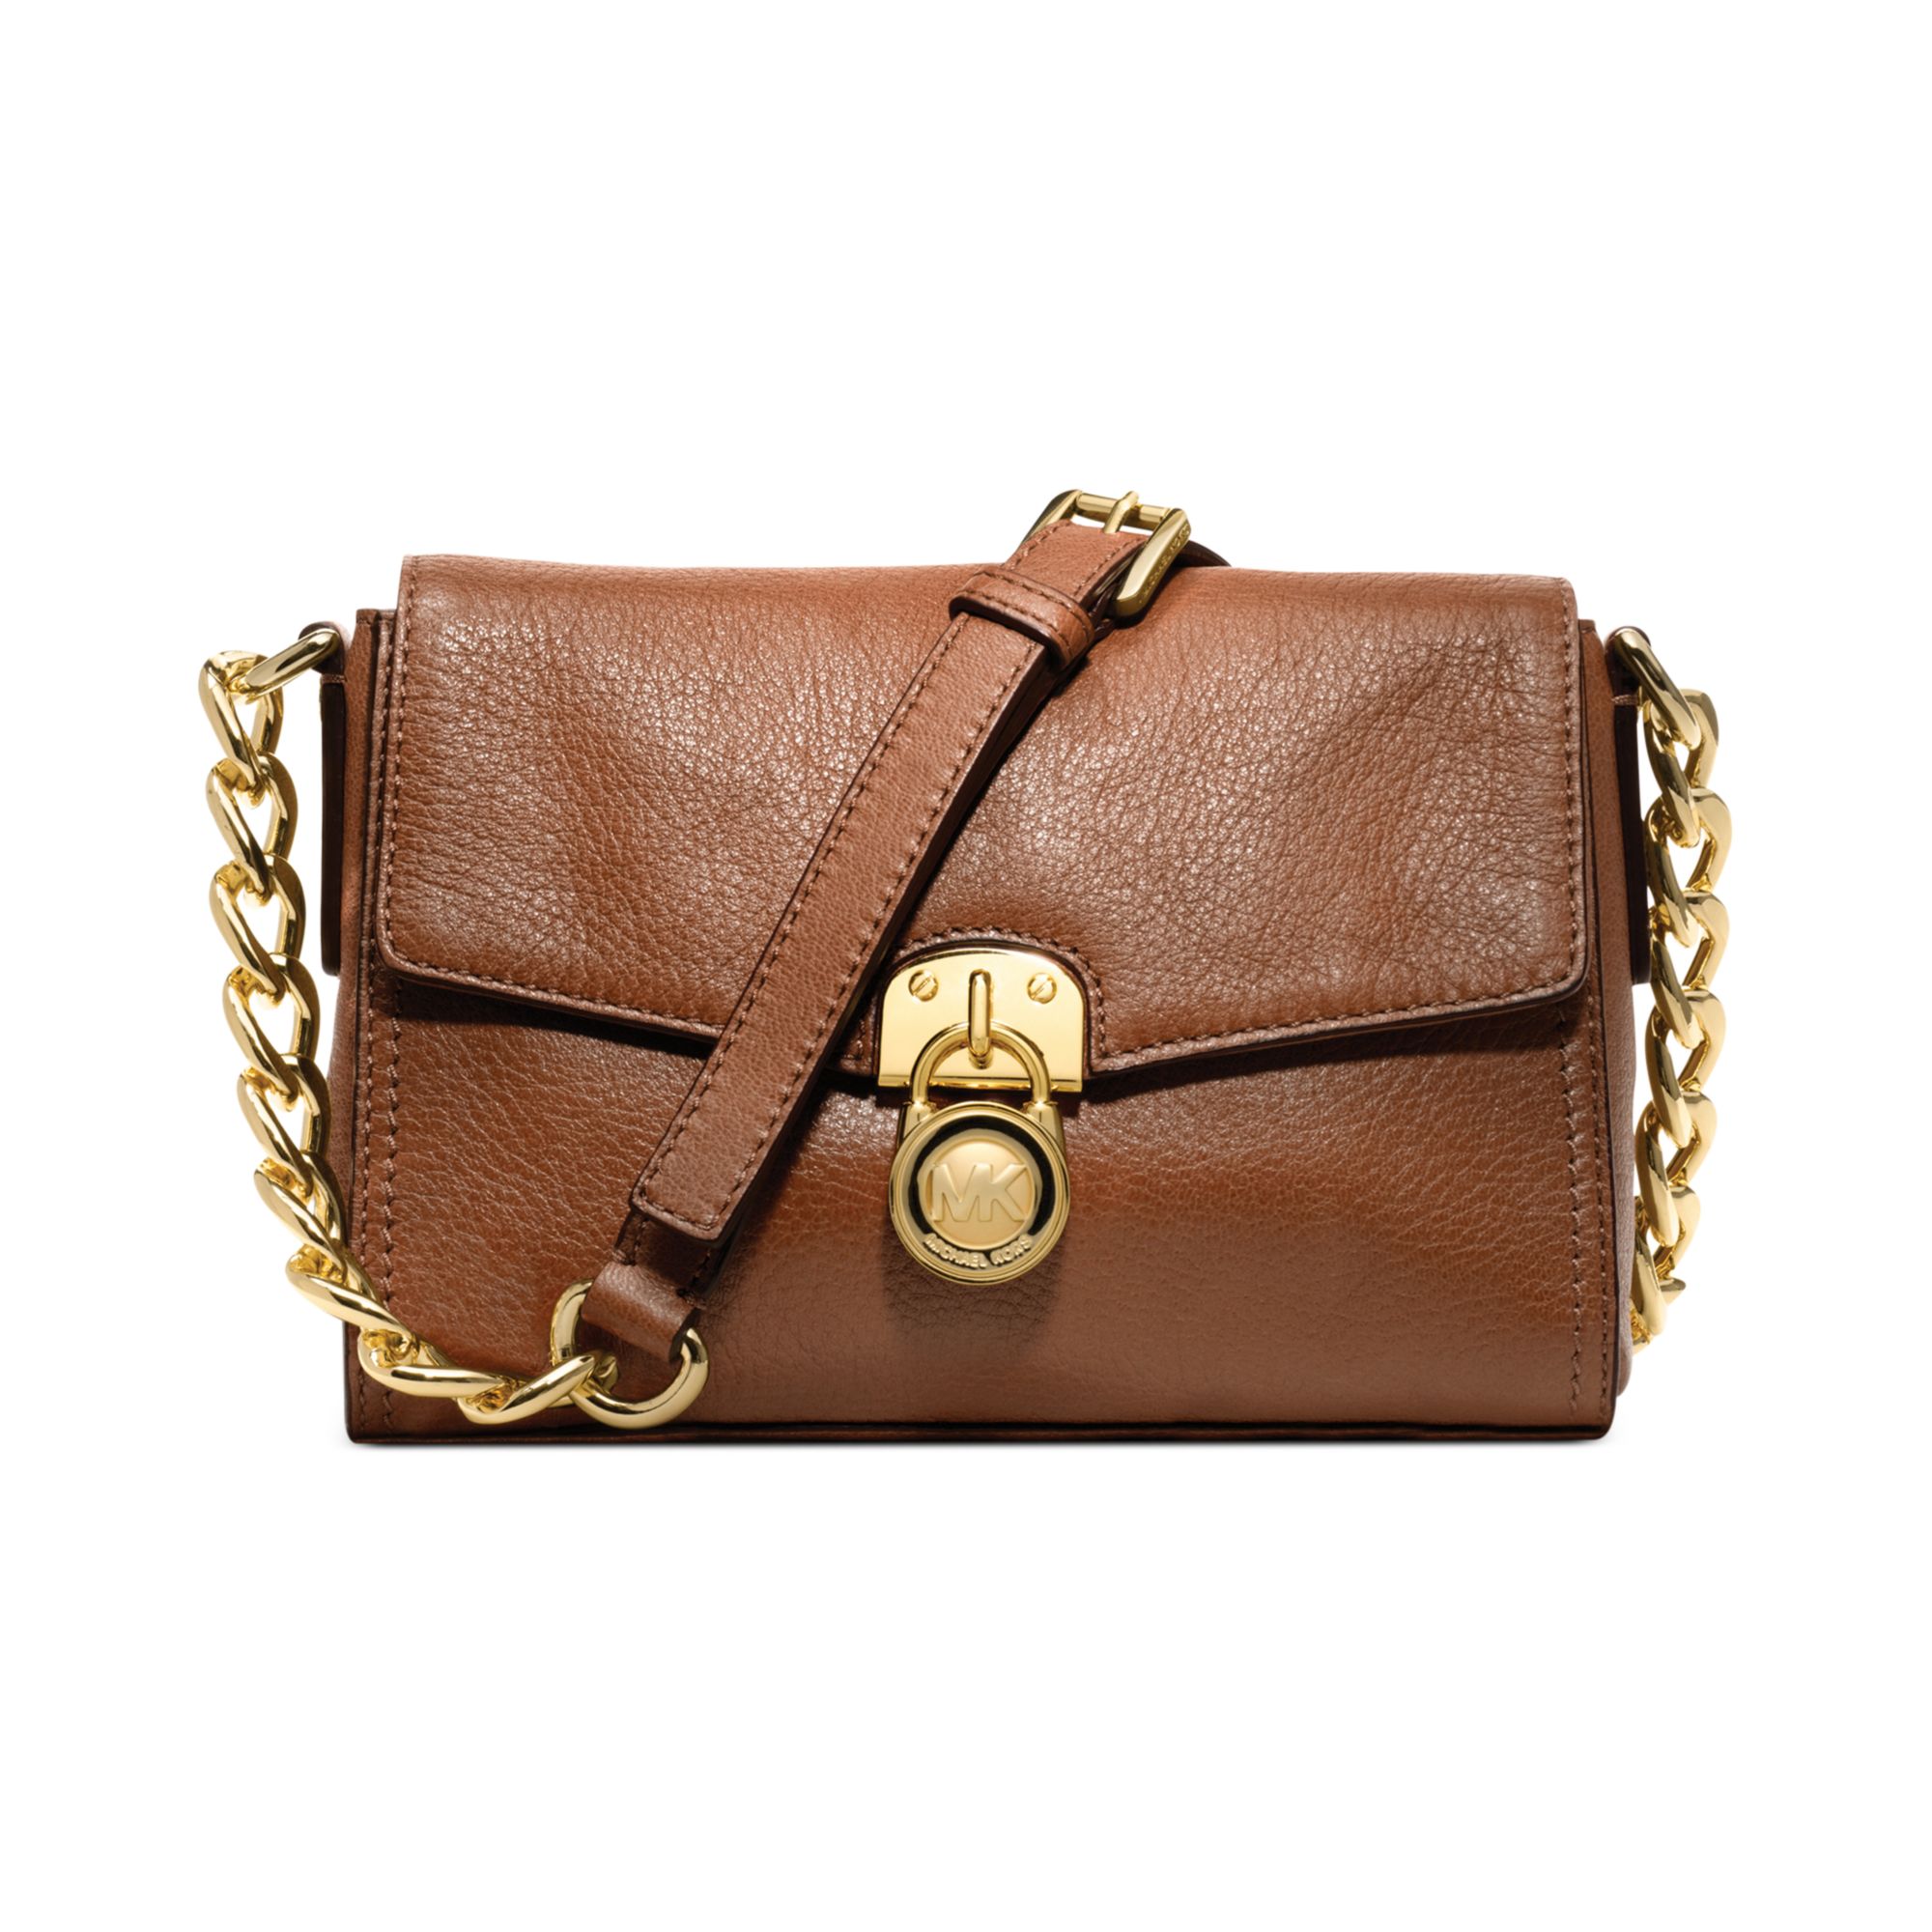 Michael Kors Hamilton Small Messenger Bag in Brown (LUGGAGE) | Lyst